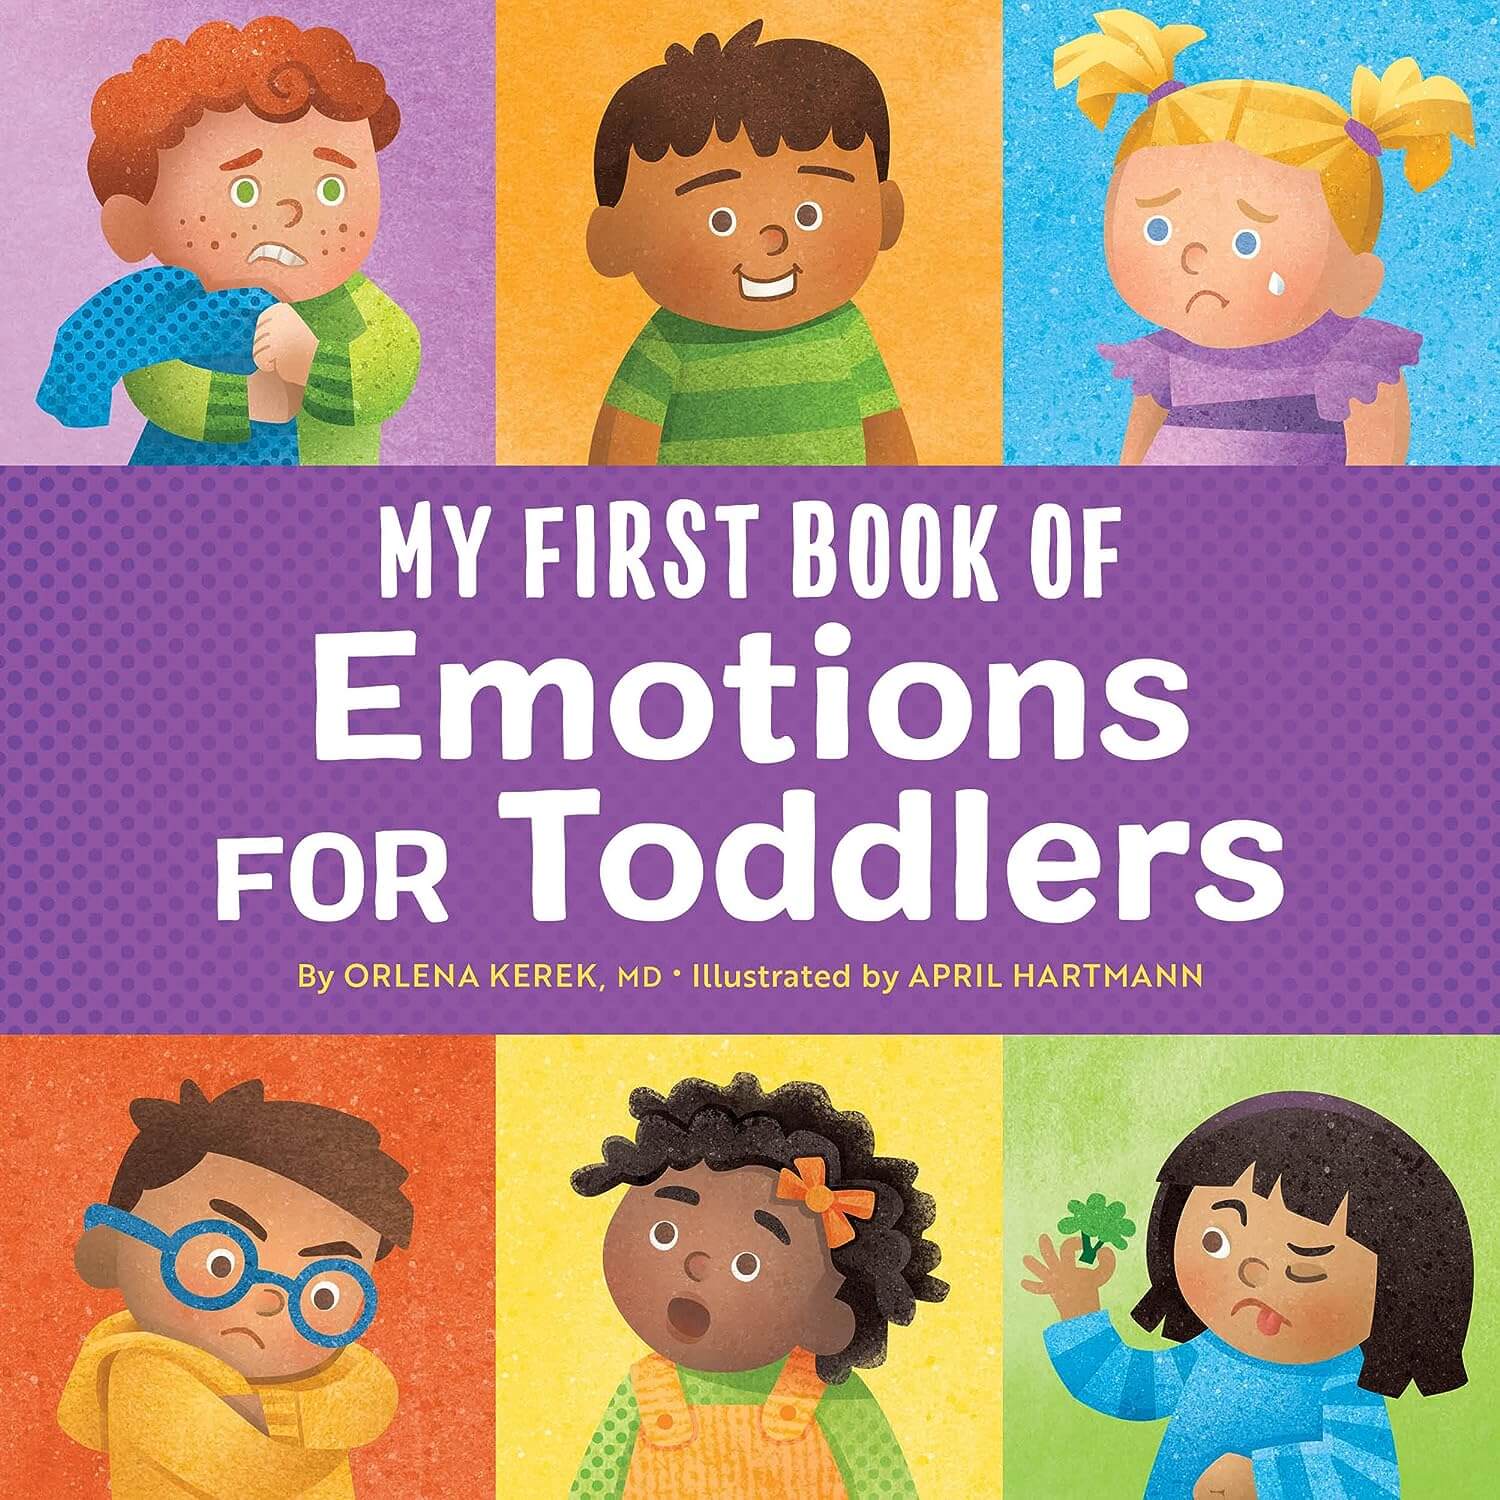 educational story books for toddlers